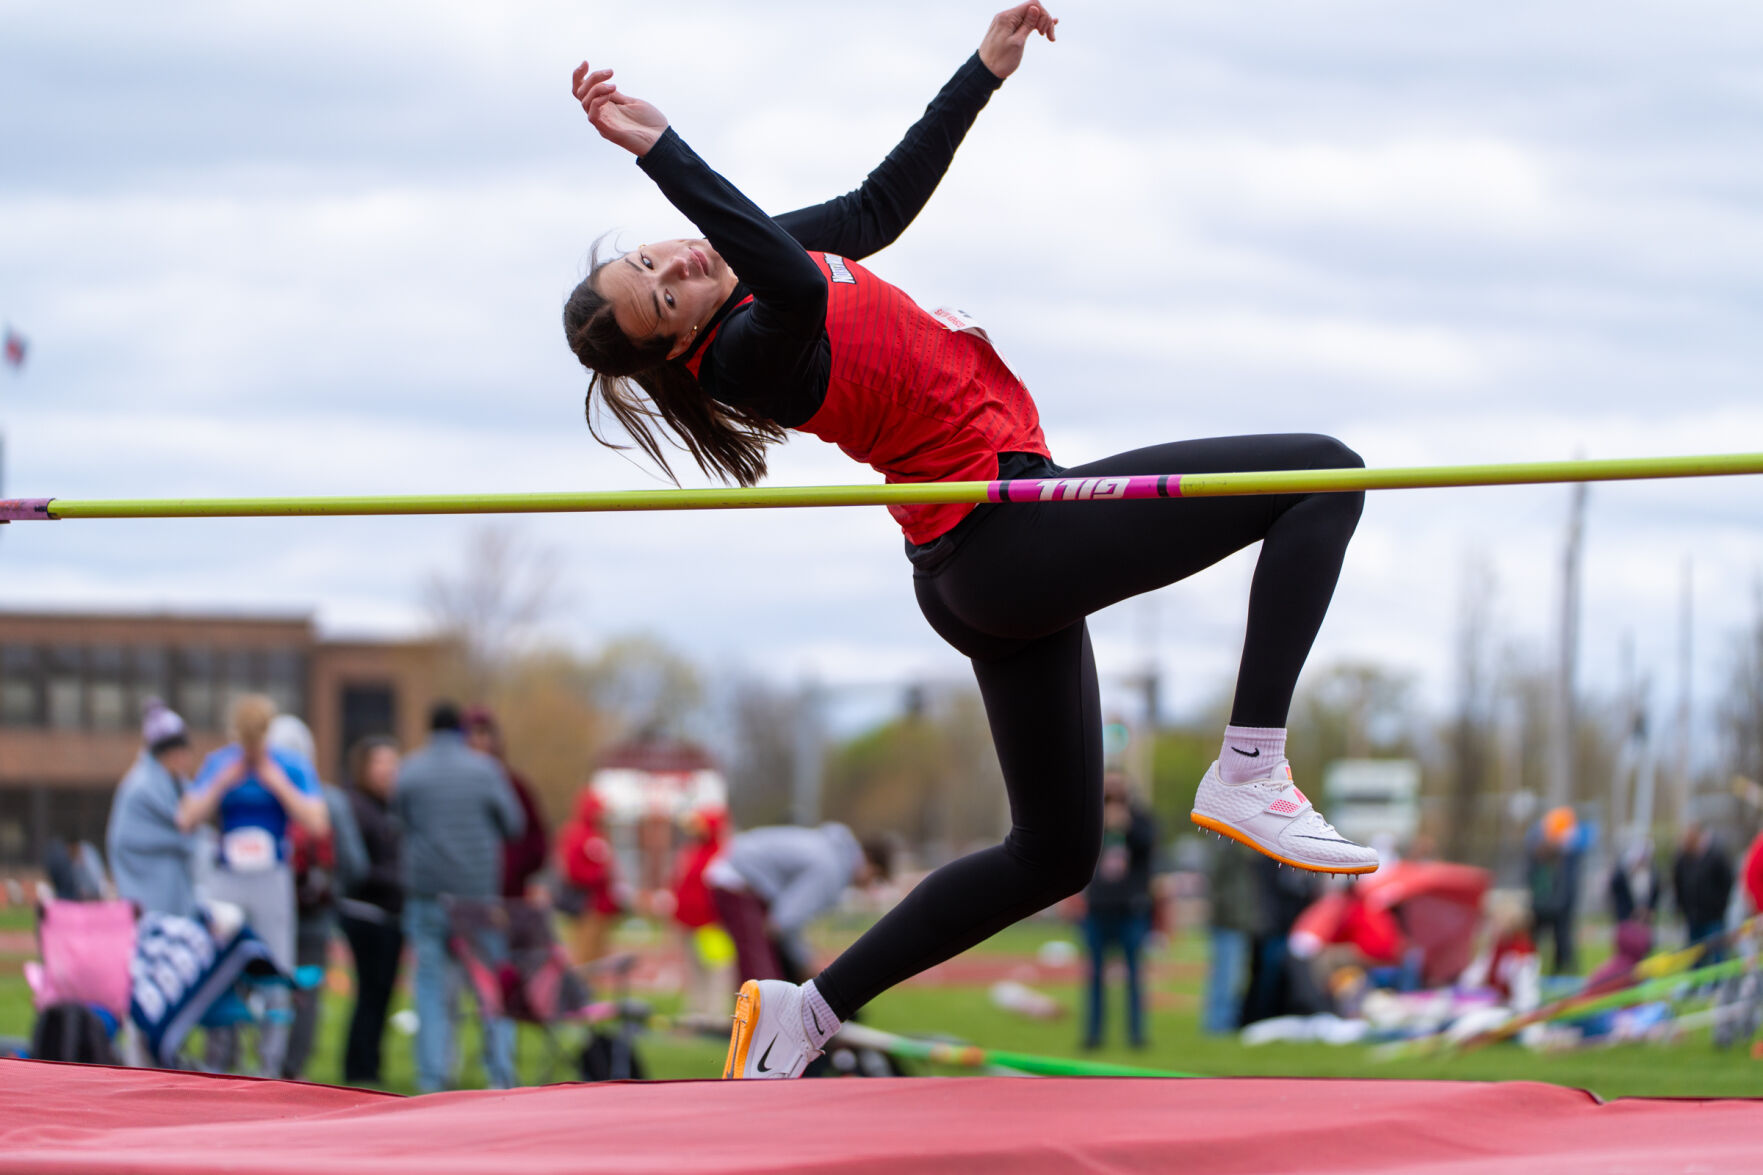 NorthWood Panthers Second at Goshen Relays; Goshen High Hosts Exciting Track Event